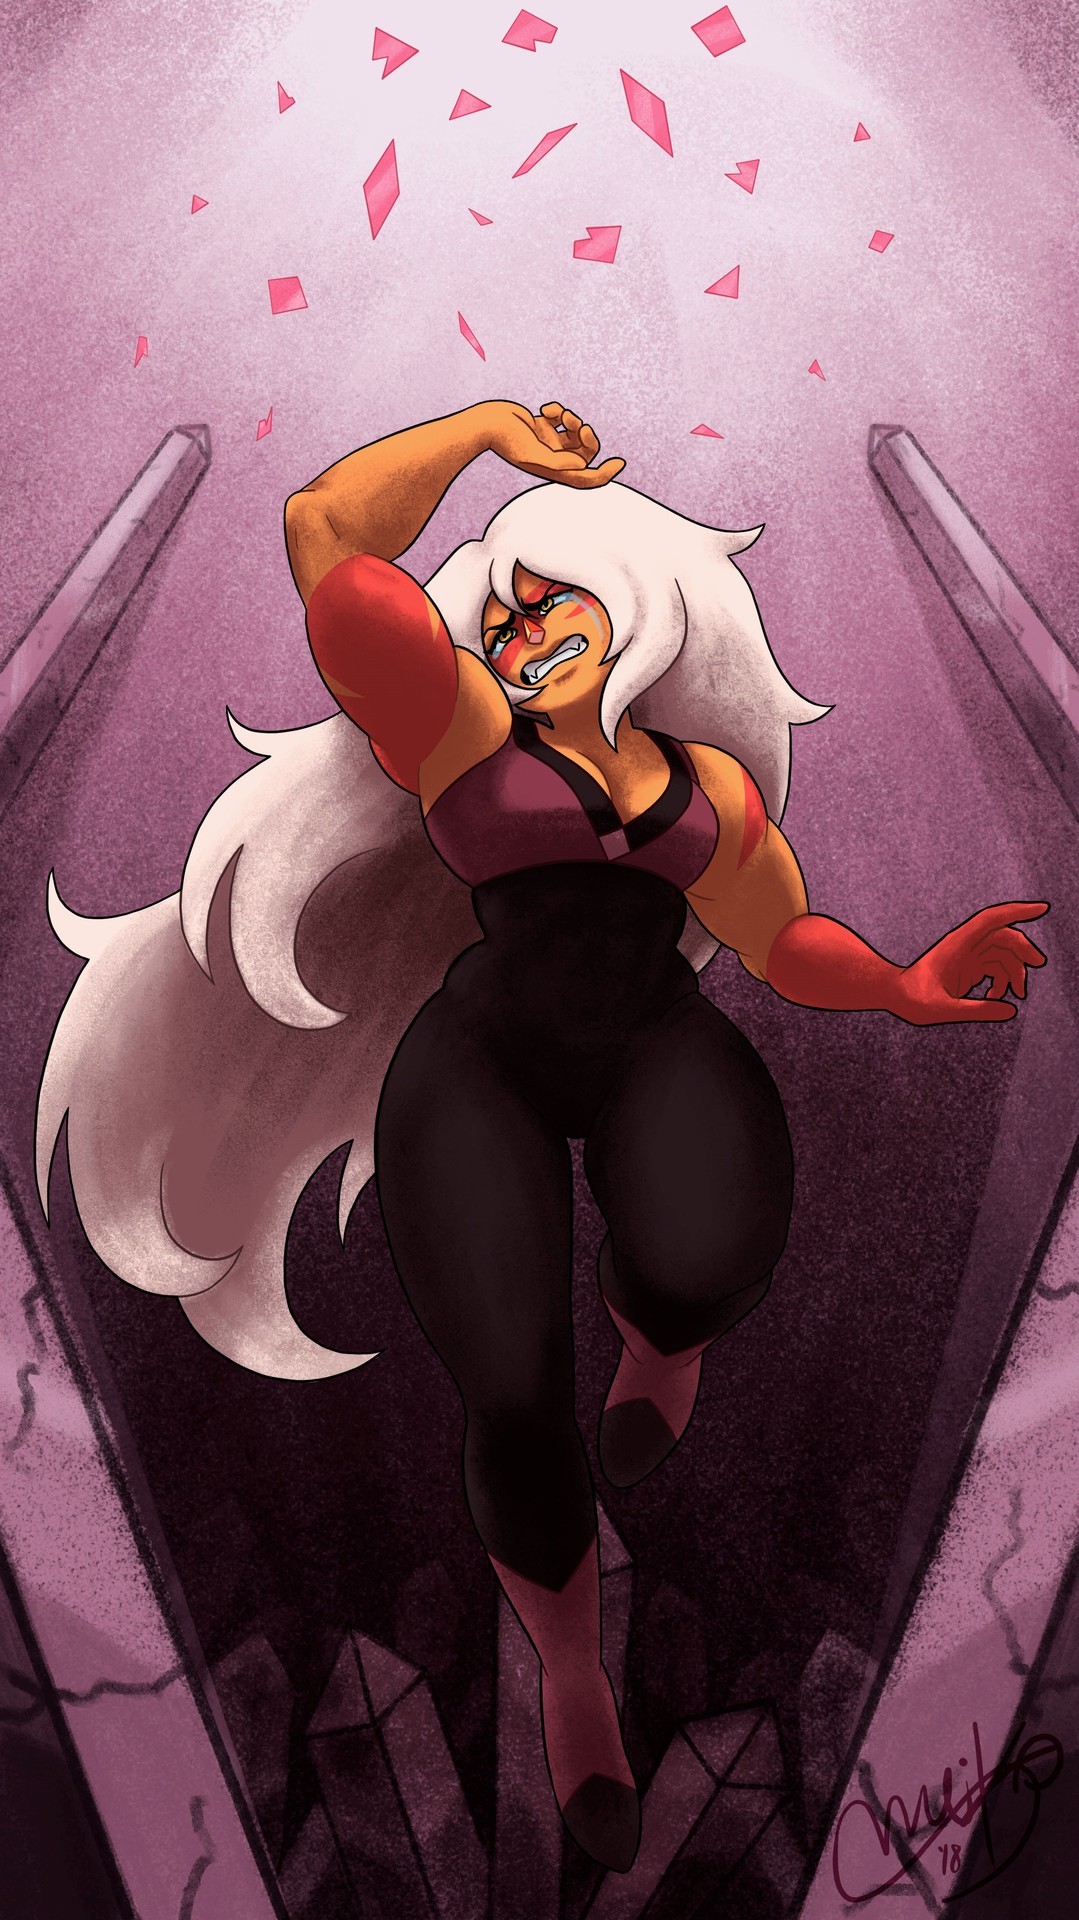 Jasper and Pink’s shattering